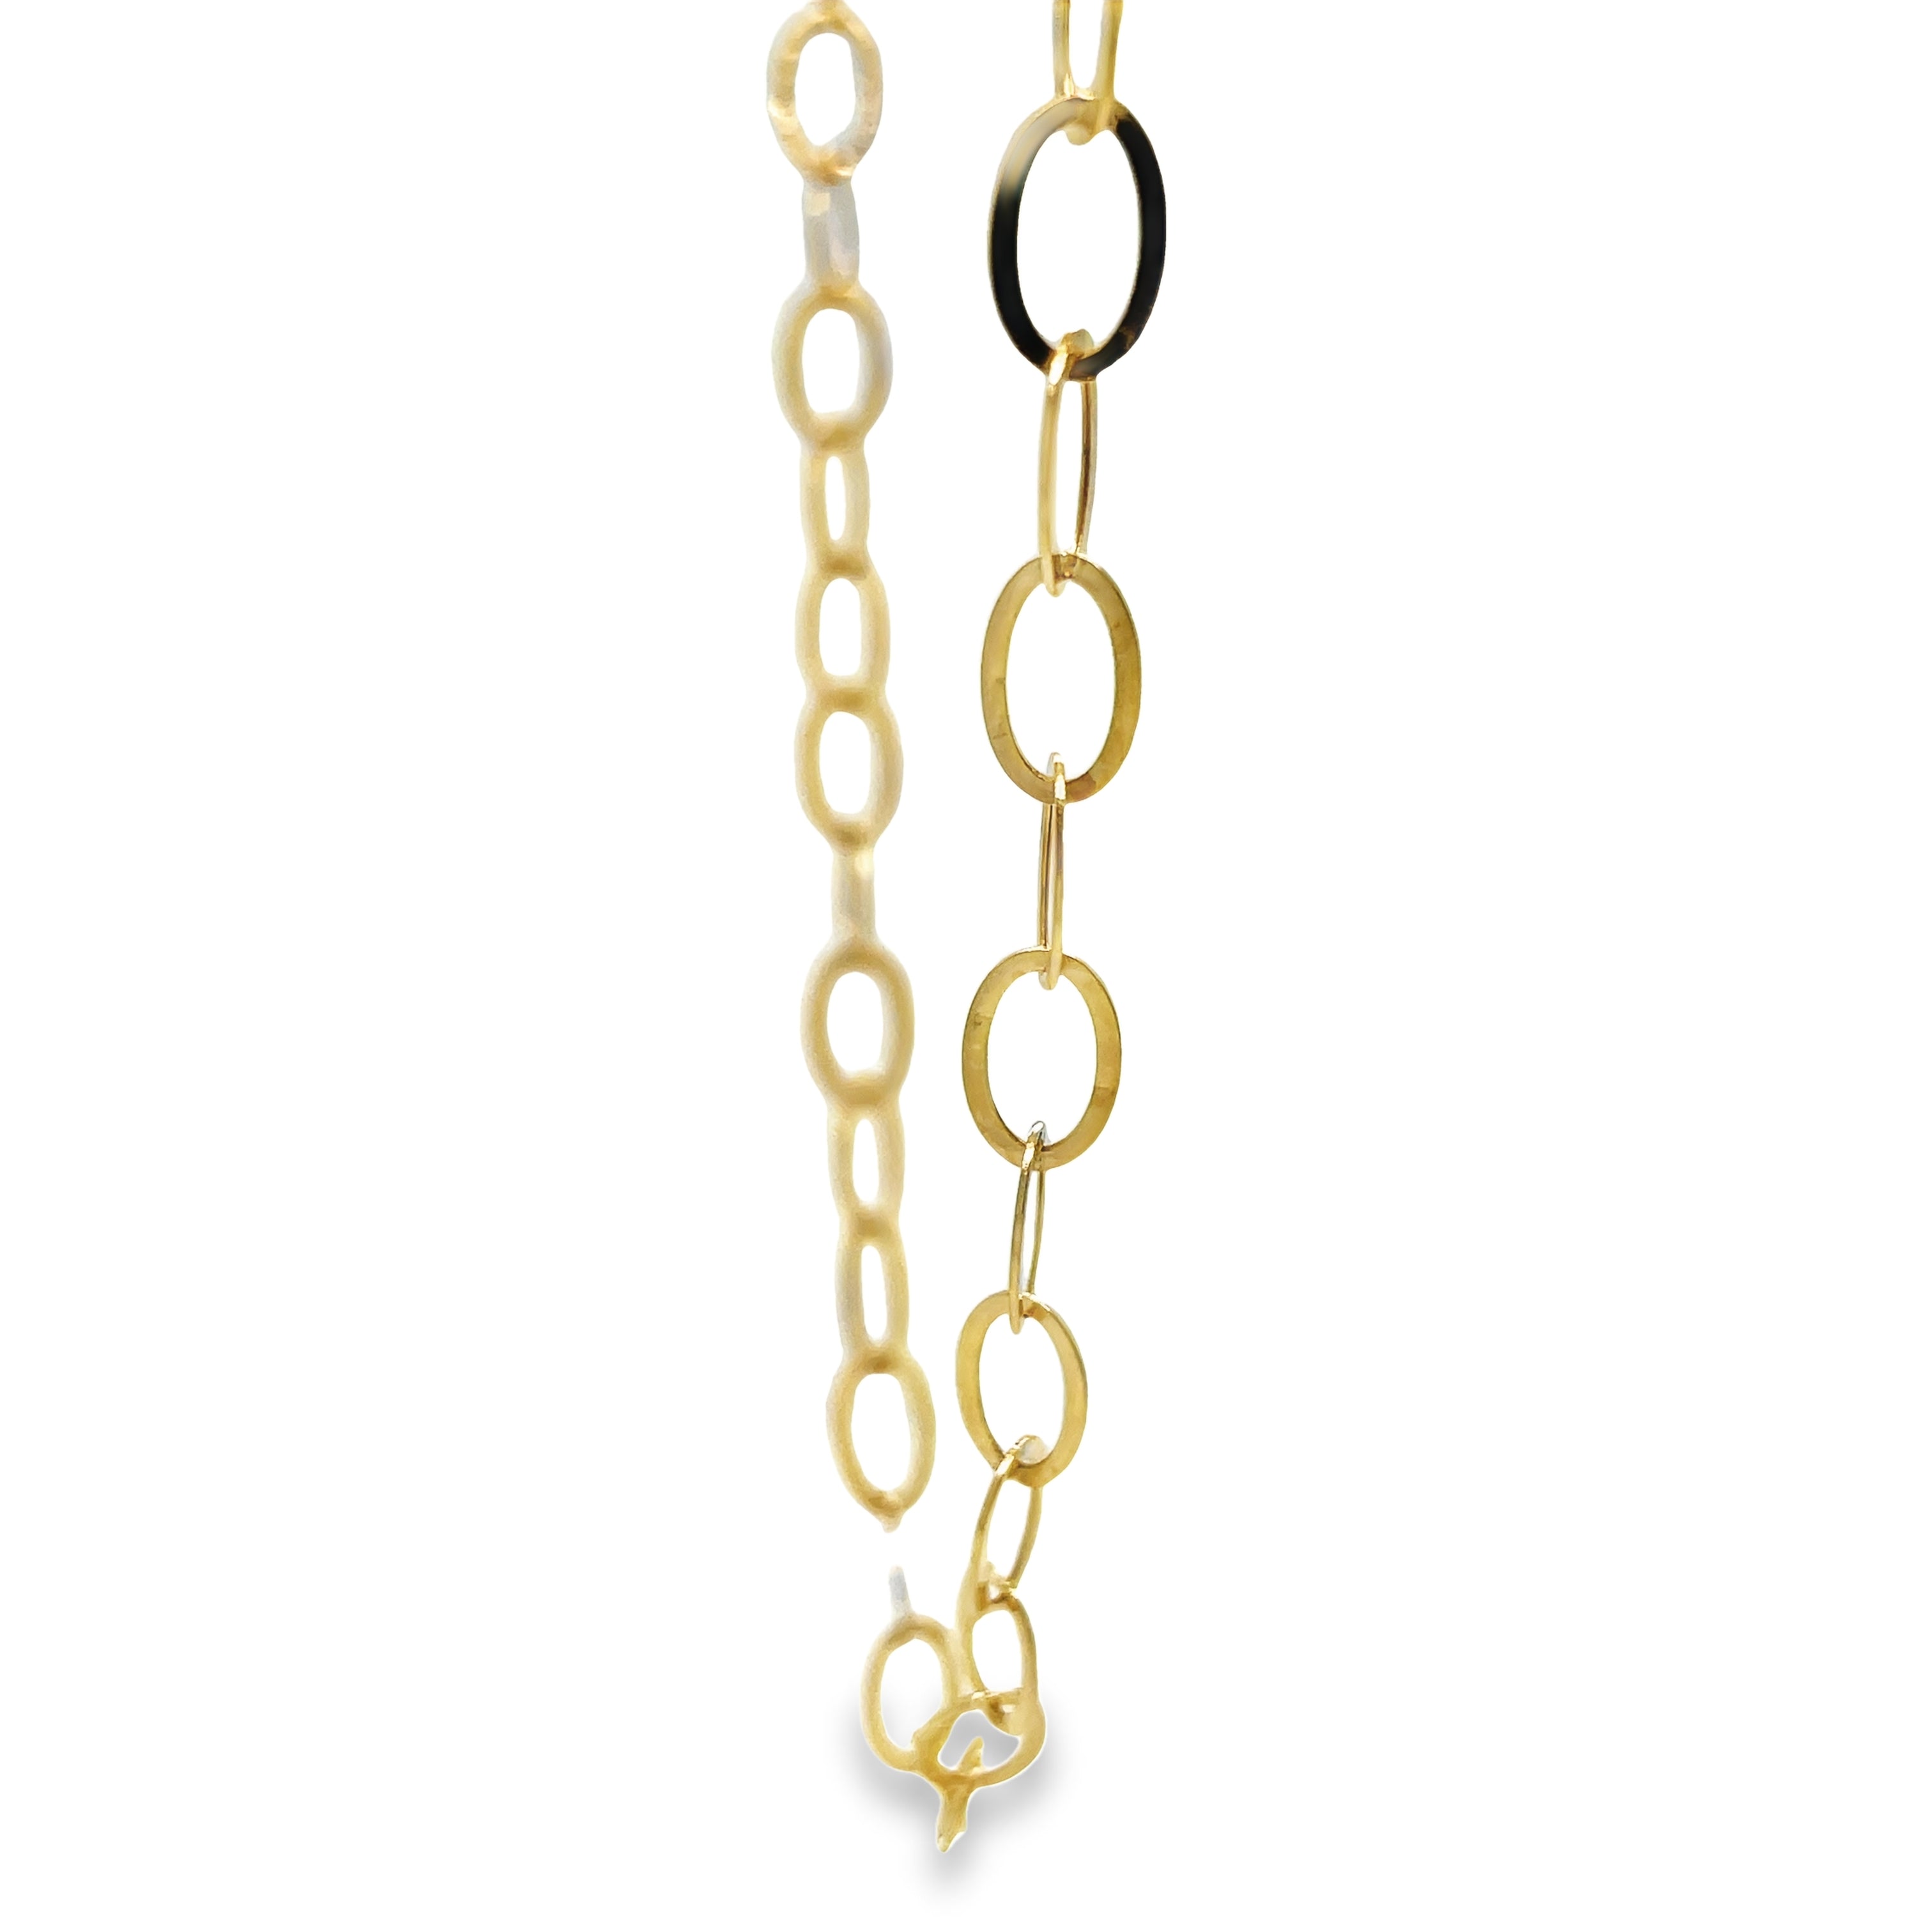 Crafted from 14k yellow gold, this long necklace boasts an enchanting oval open link design. Lightweight yet durable, it's perfect for adding a touch of elegance to any outfit. With a length of 30", it's versatile and easy to style for any occasion. Elevate your look with this luxurious piece.